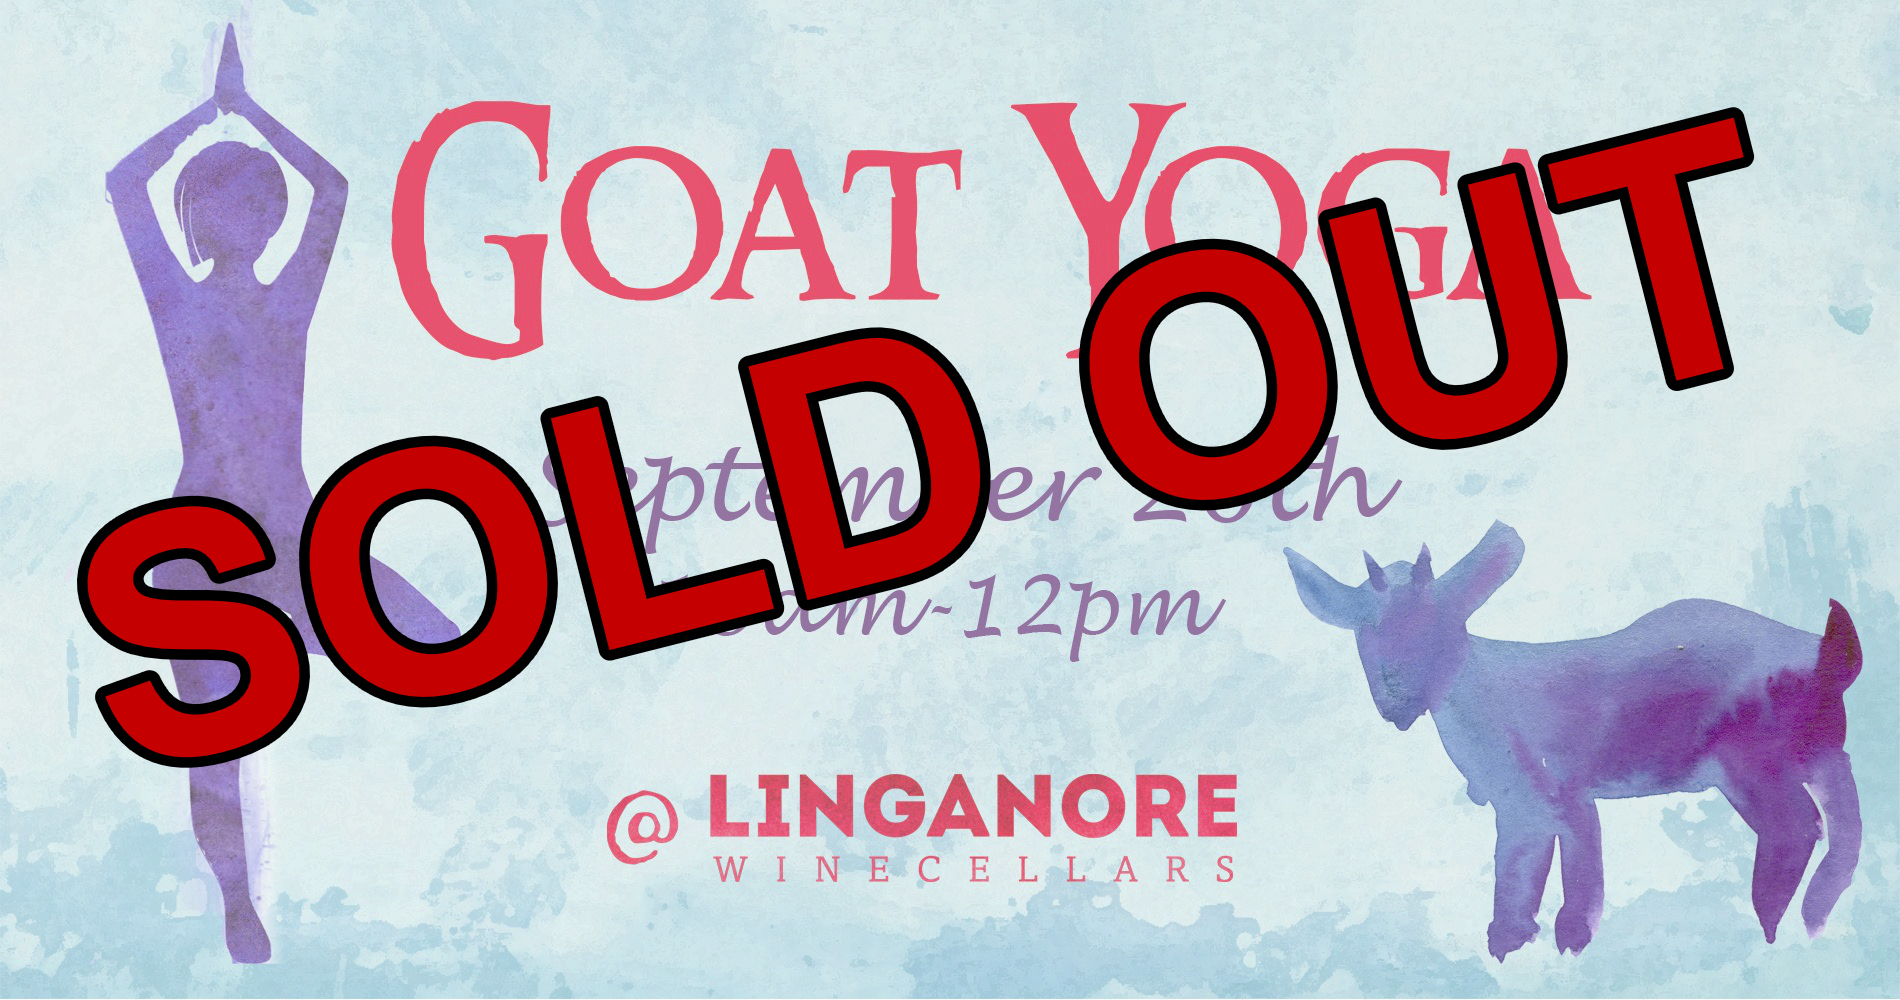 sold out goat yoga banner